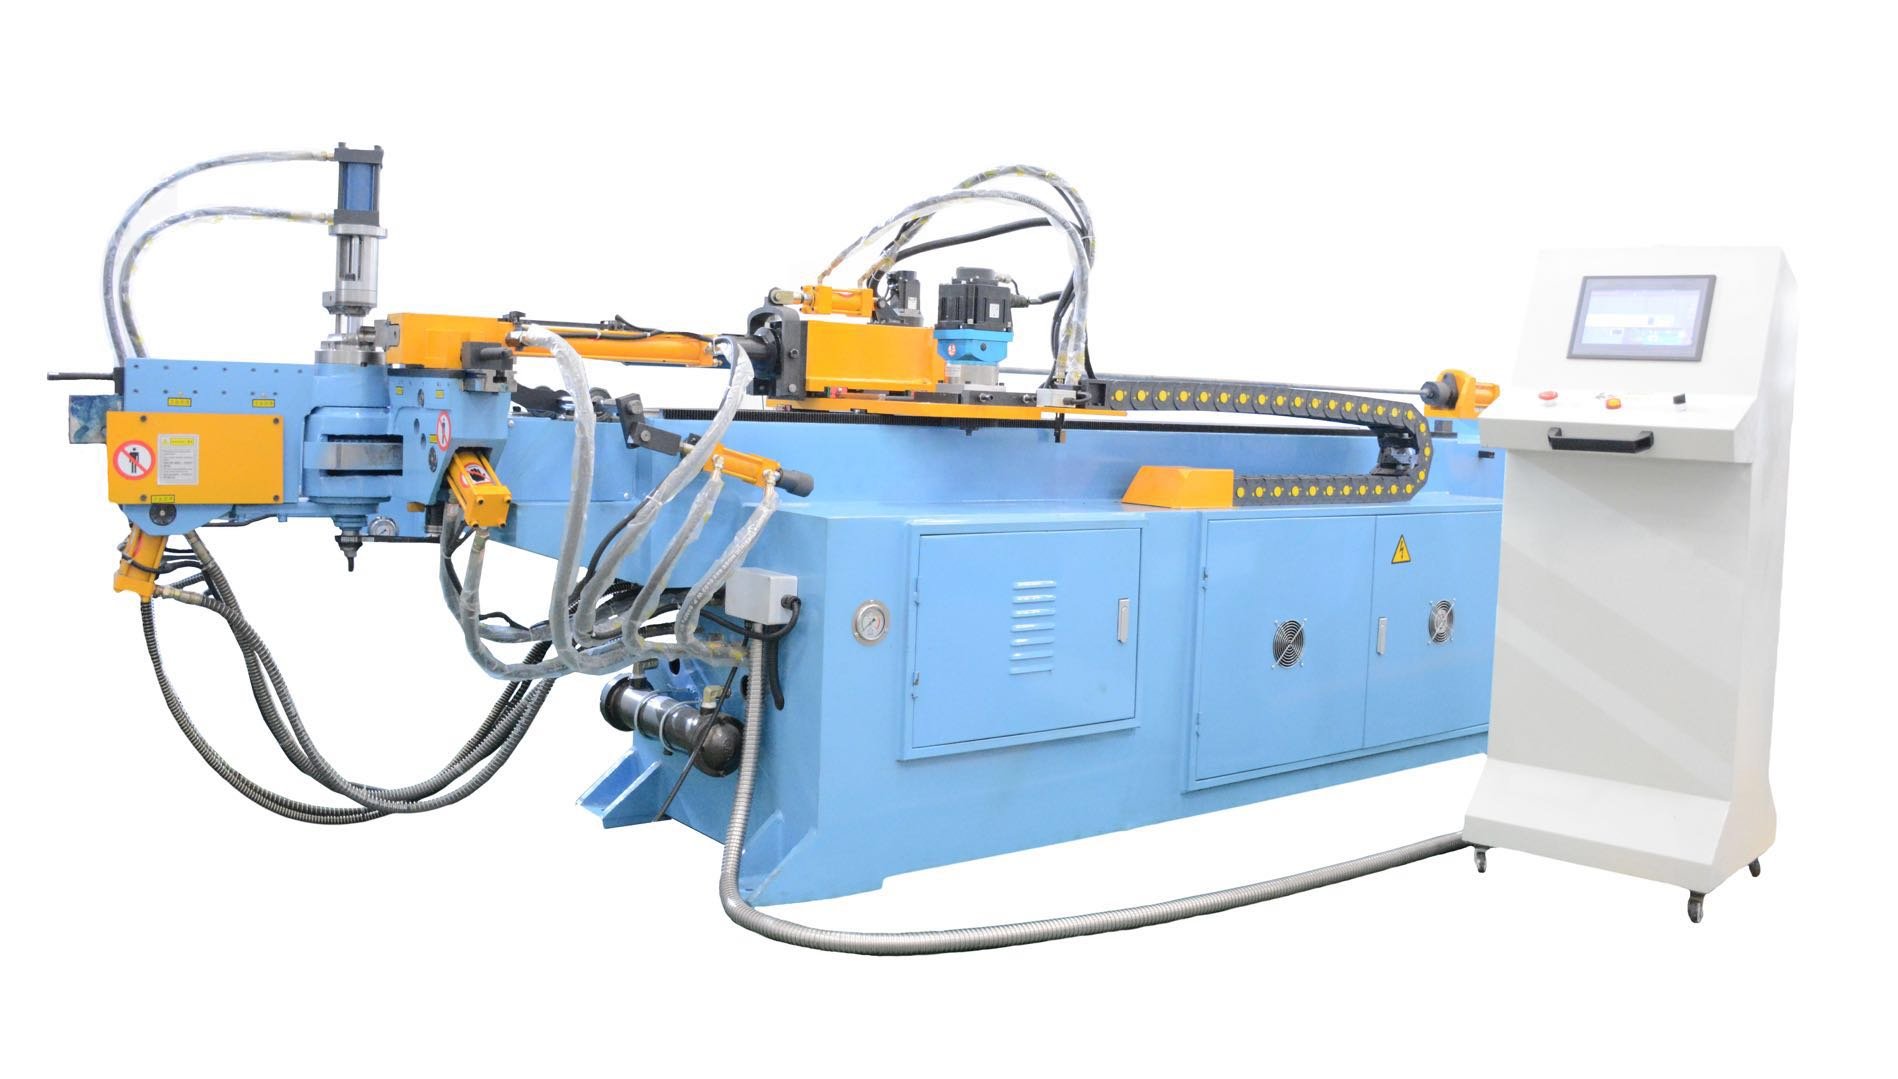 Precautions for lubrication of pipe bending machine